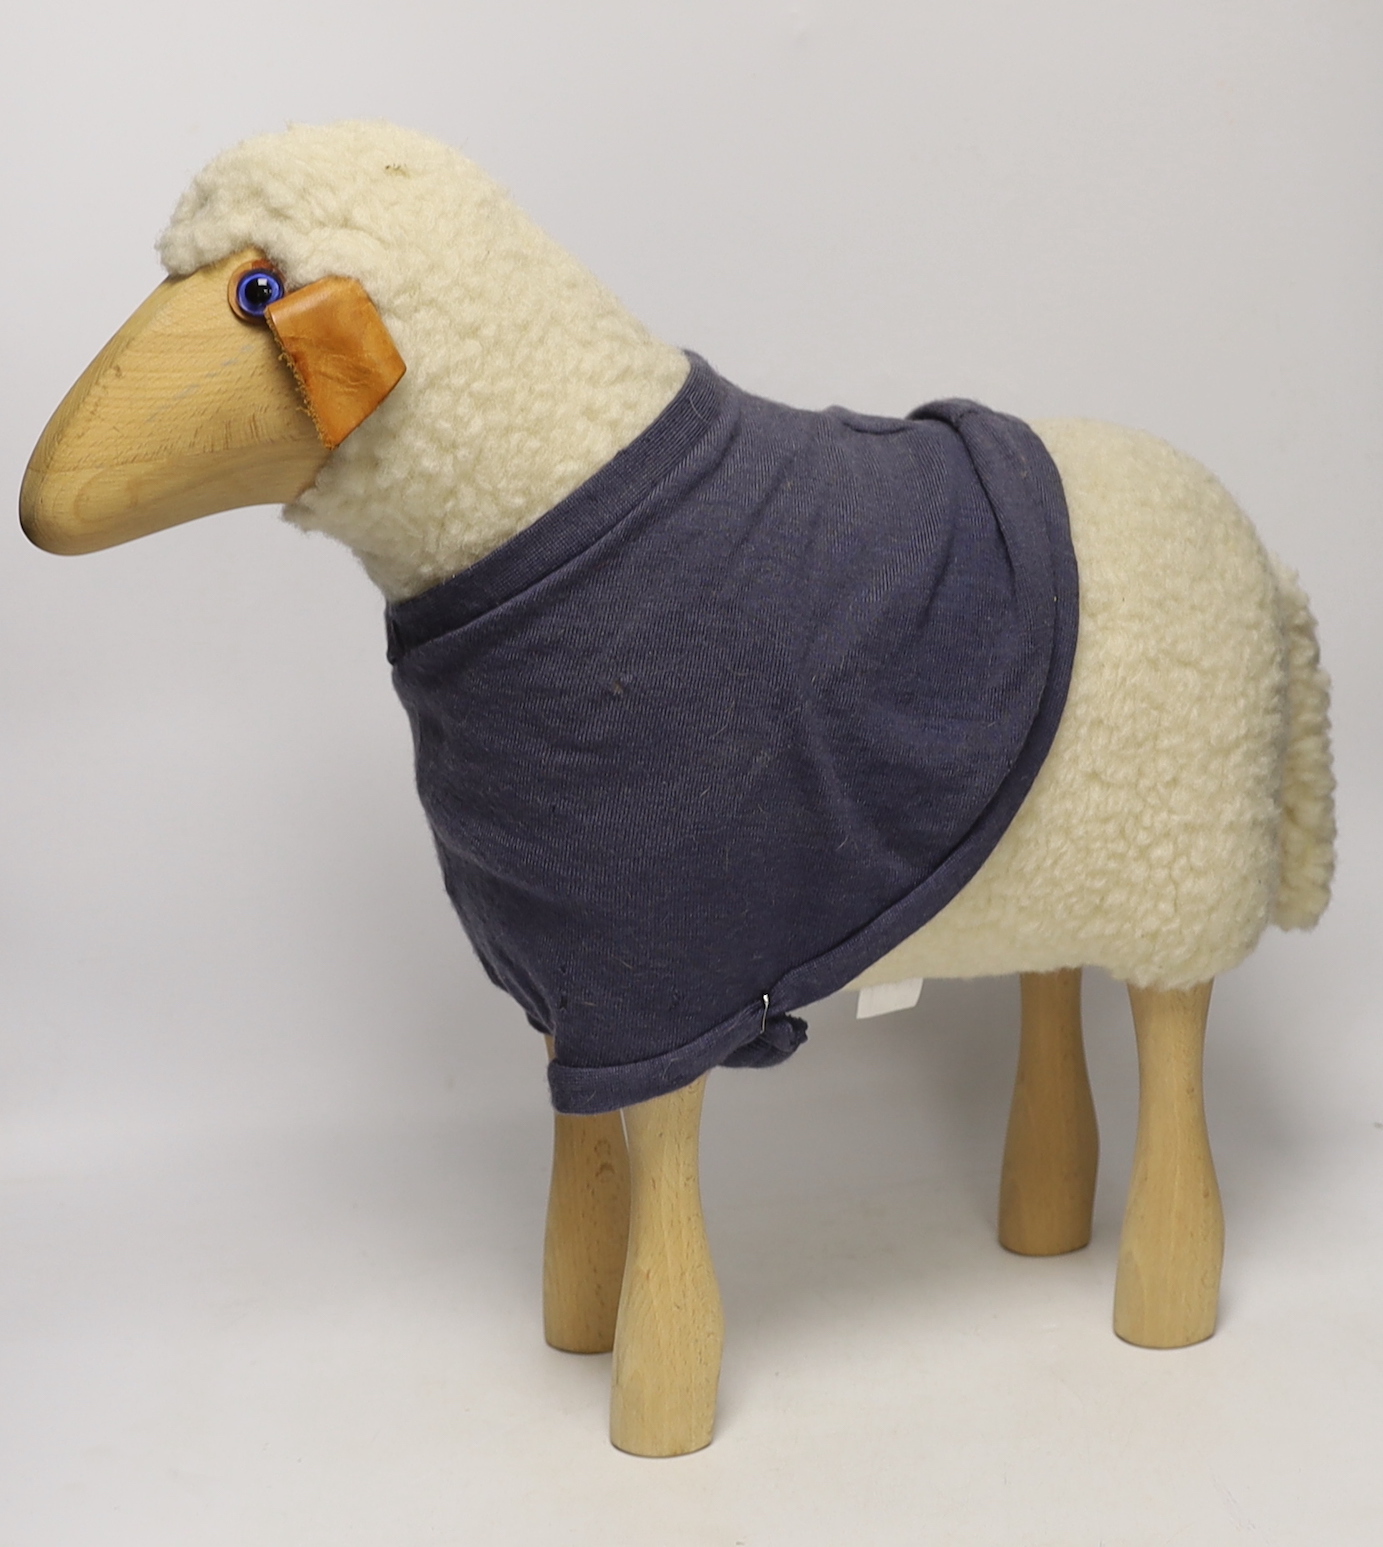 A Hanns-Peter Krafft sheep for Mayr Wool, beech body with wool and leather details, 46cm high